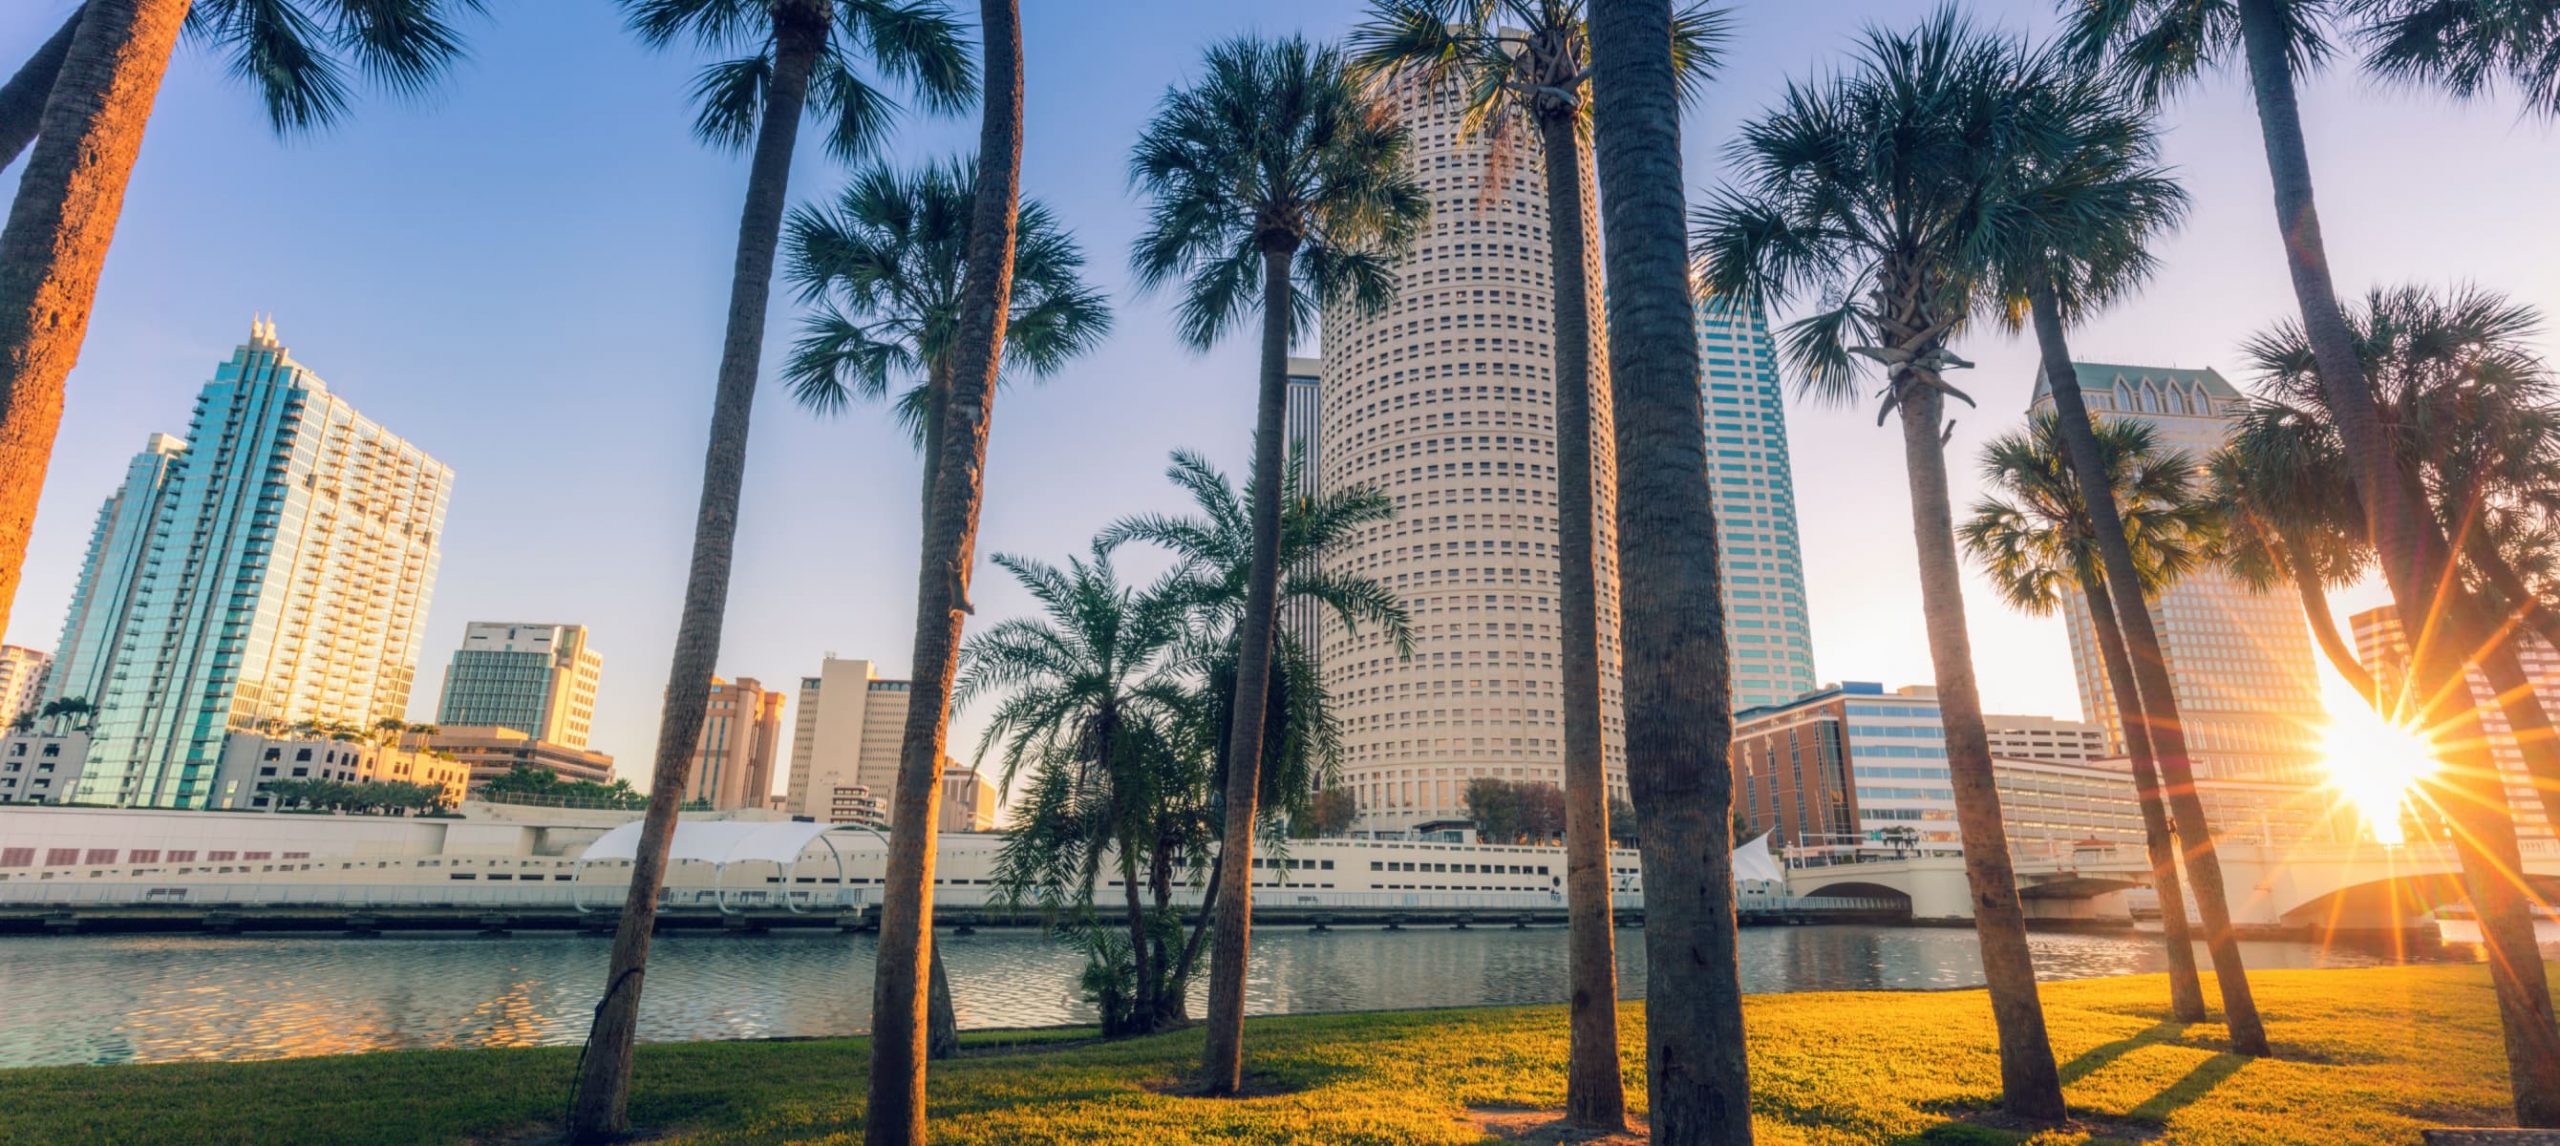 The Best Things To Do In Downtown Tampa, FL